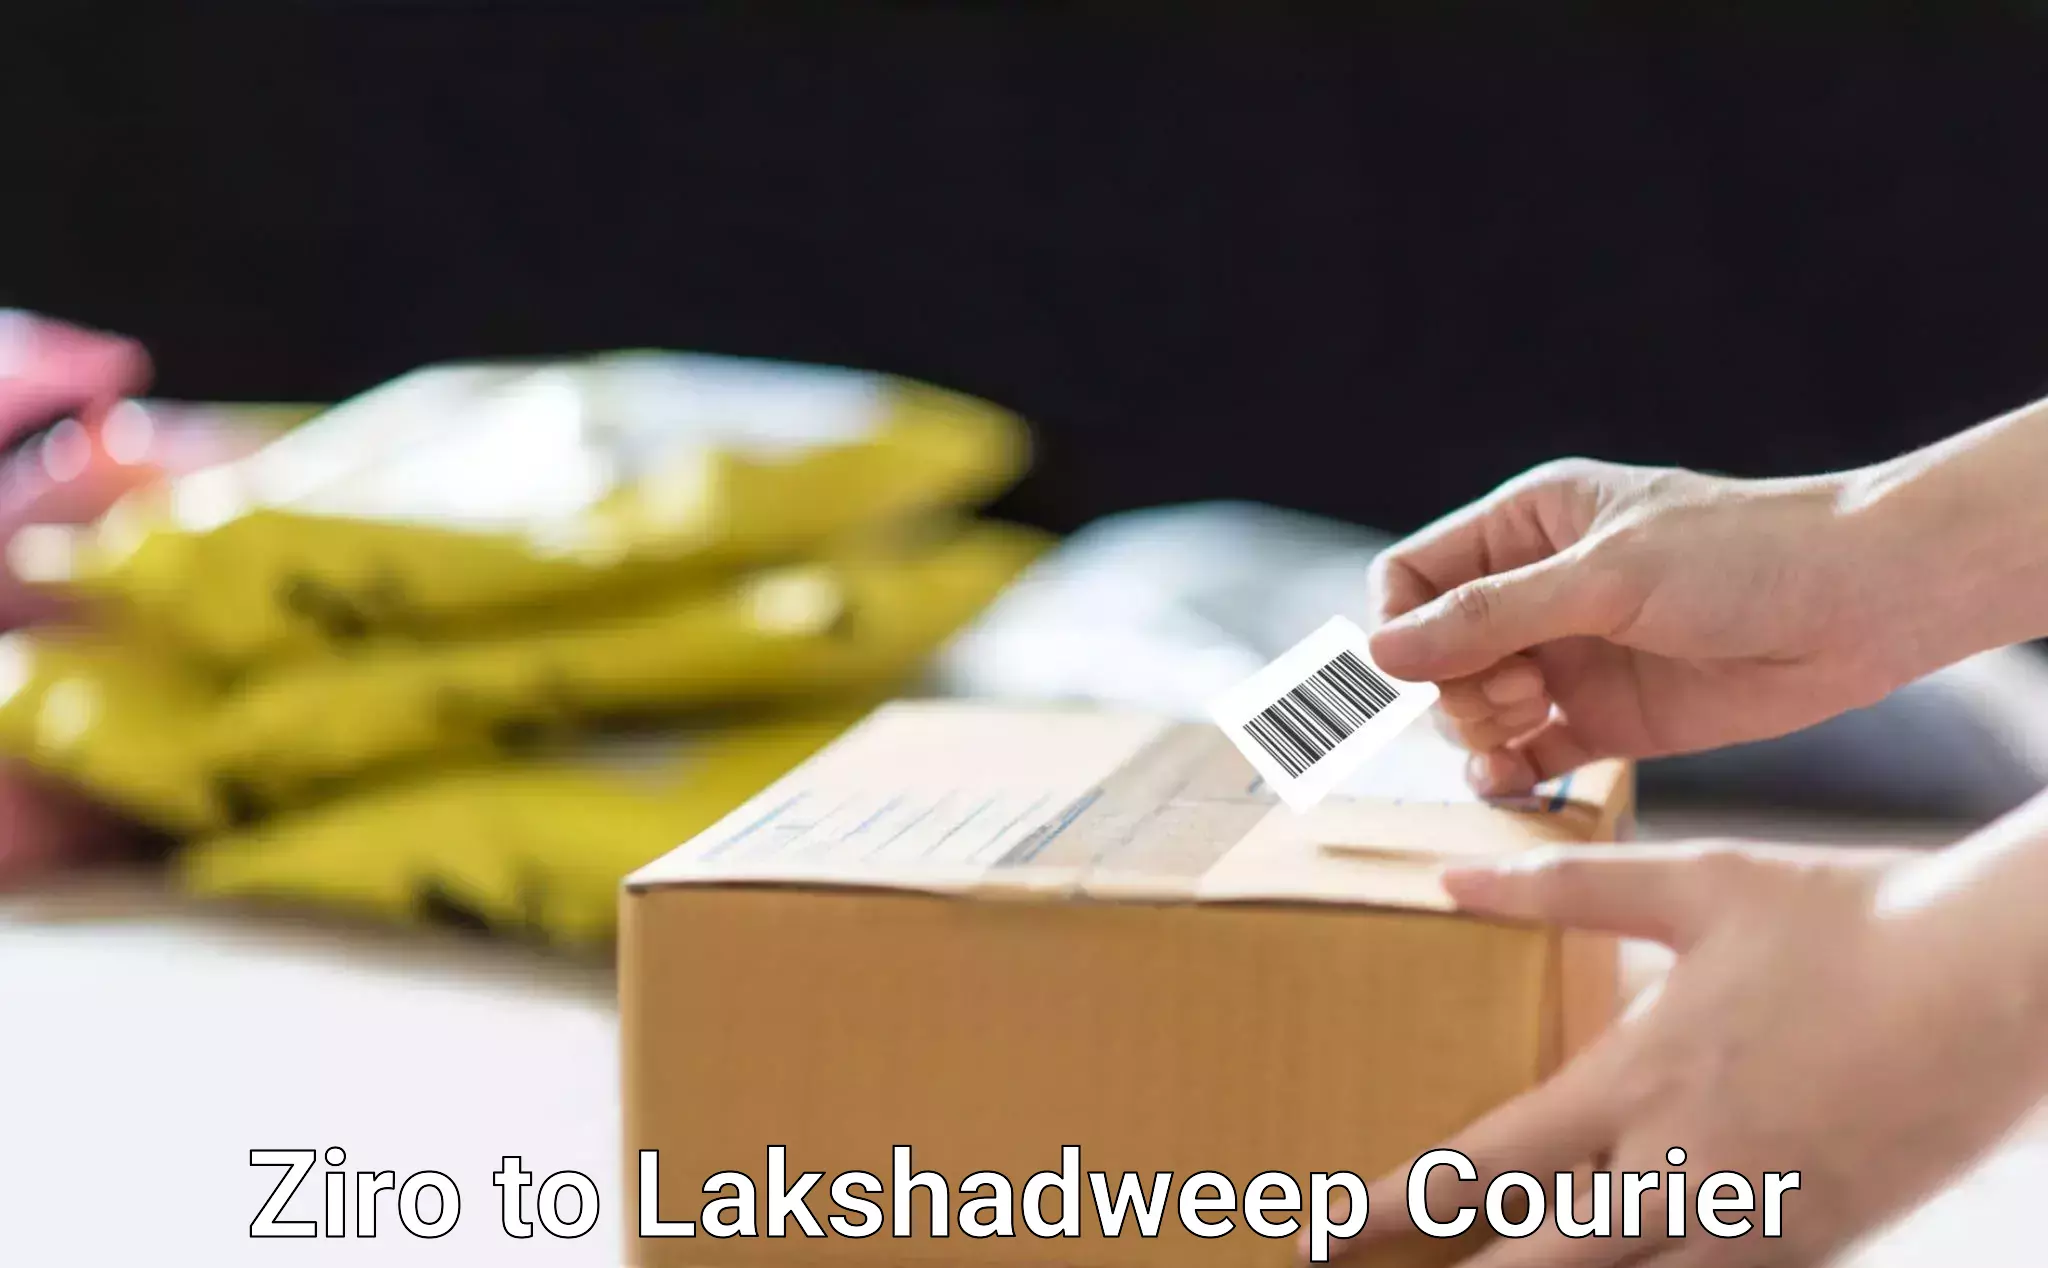 Professional parcel services Ziro to Lakshadweep